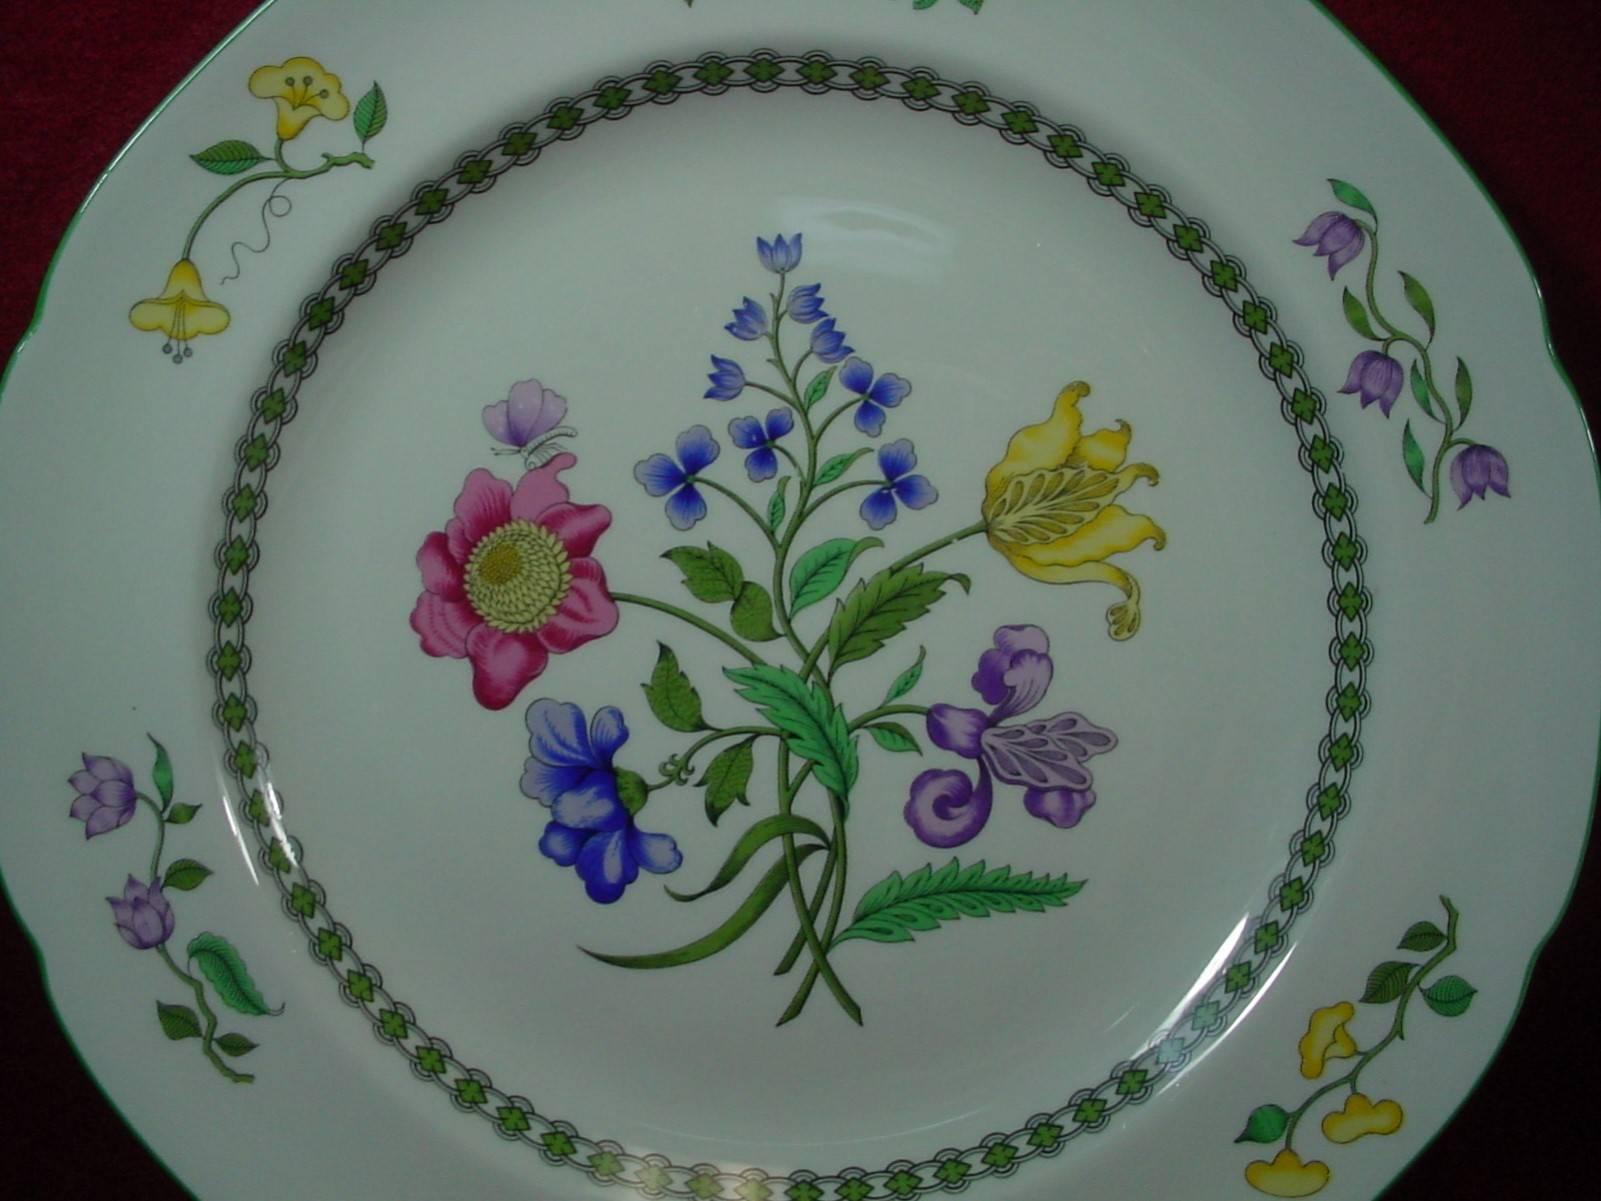 CHINA FINDERS 

China, Crystal, Flatware and Collectible Matching Service is offering ONE (1) 

SPODE china SUMMER PALACE pattern DINNER PLATE

in great condition free from chips, cracks, break, stain, or discoloration and with only a minimum